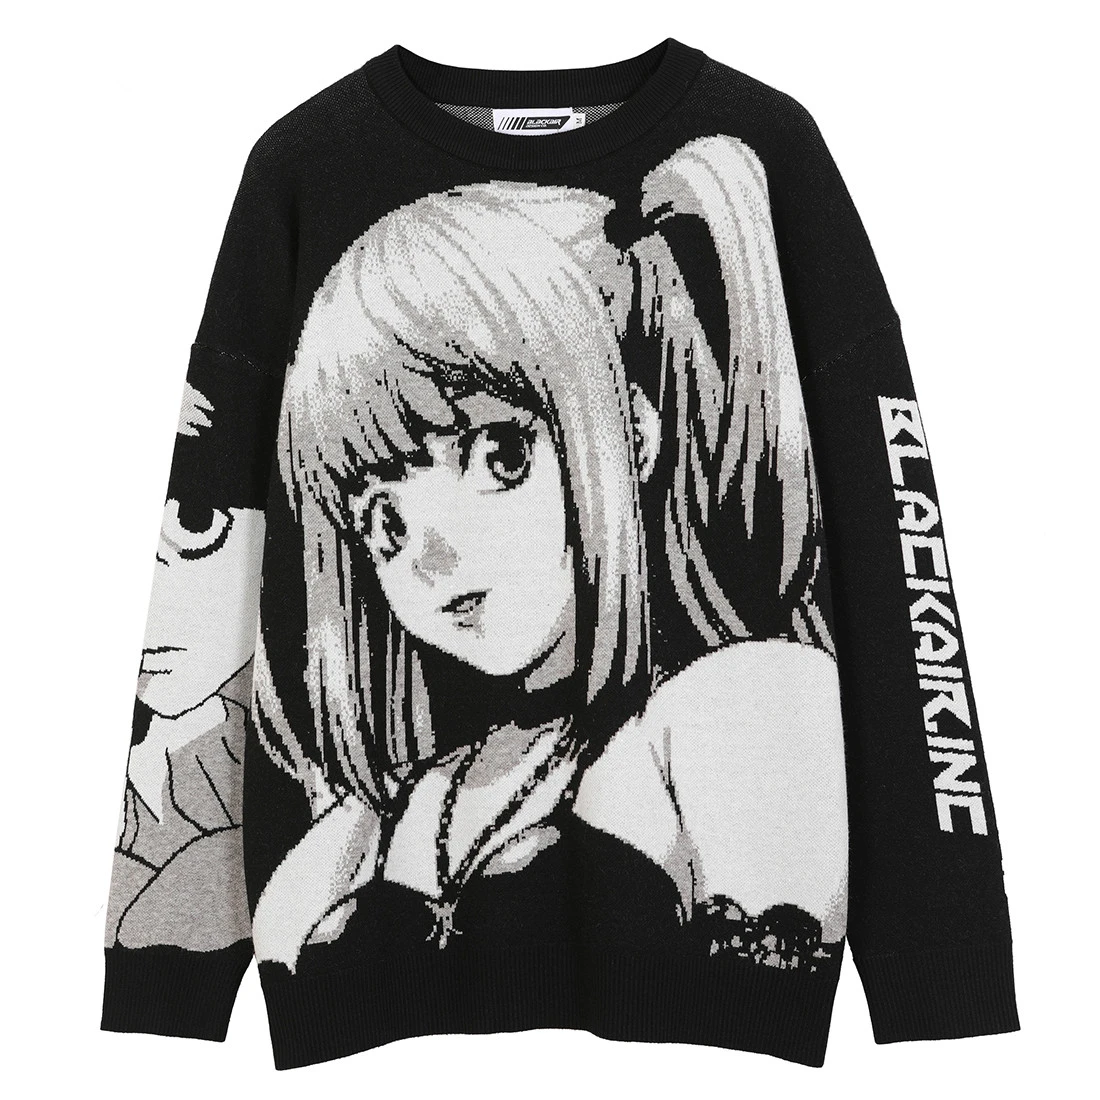 2021 Hip Hop Streetwear Vintage Harajuku Knitting Sweater Anime Girl Knitted Death Note Misa Sweater Pullover Winter Clothes black cardigan men